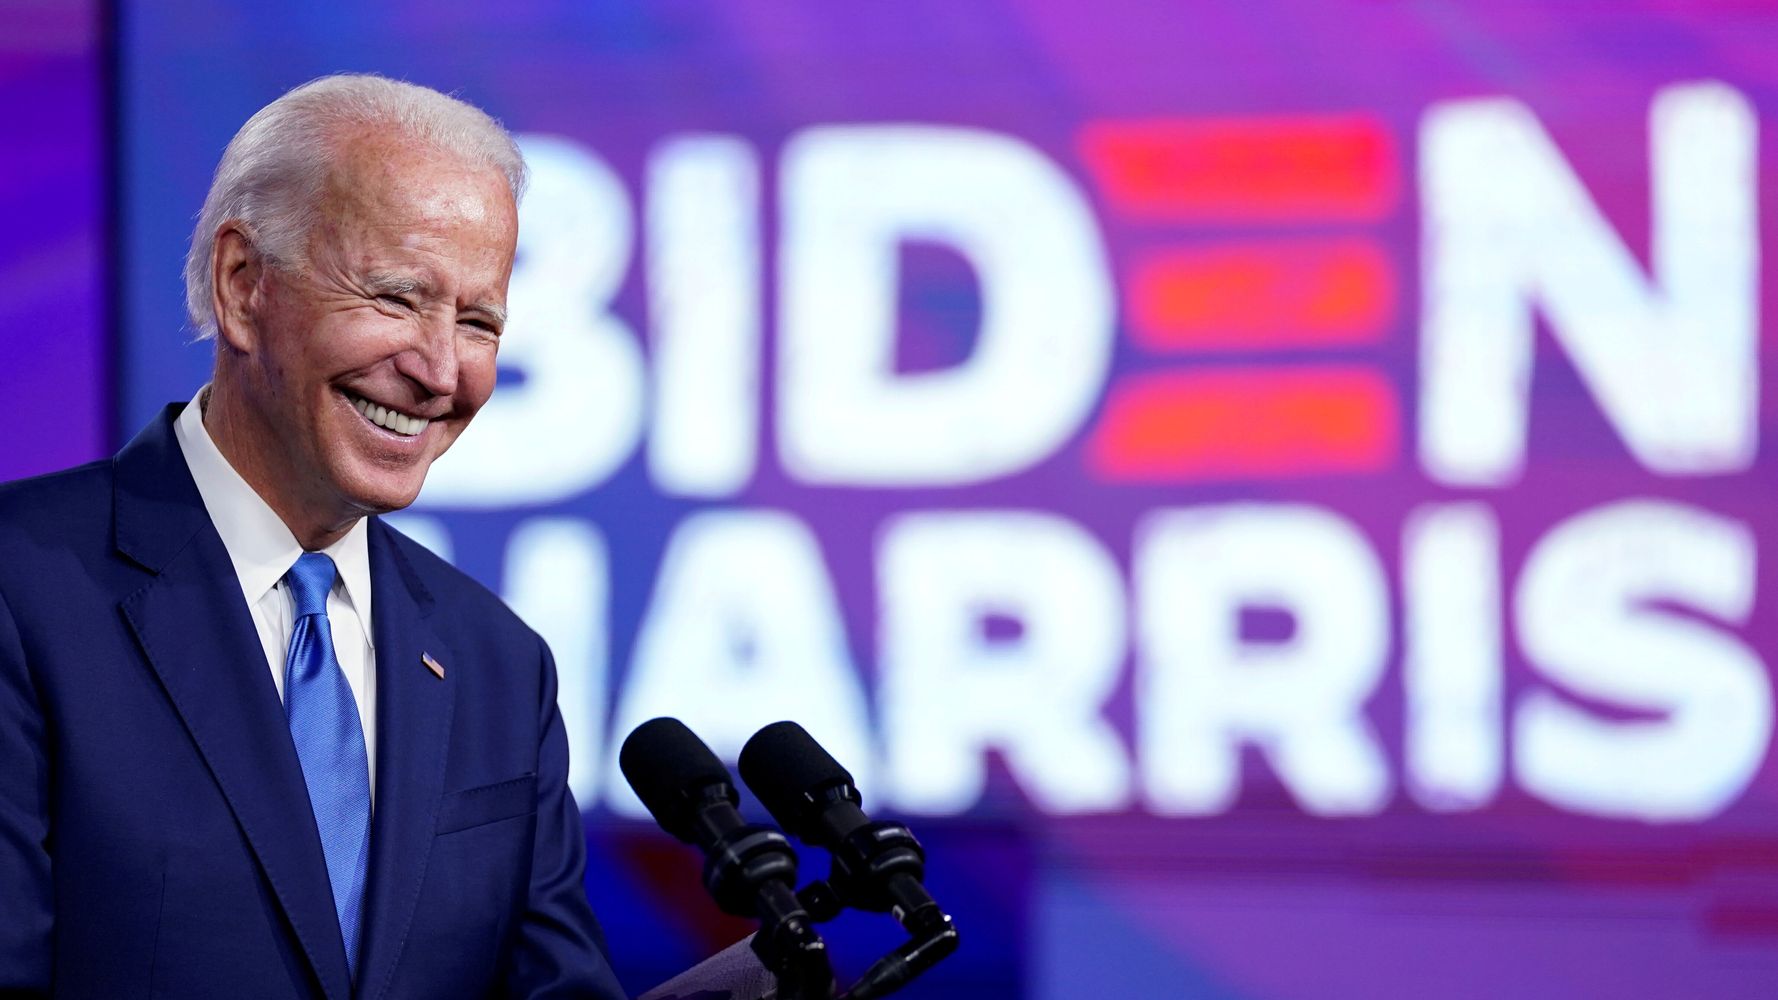 California Certifies Its Electoral Votes, Officially Securing Biden's Victory